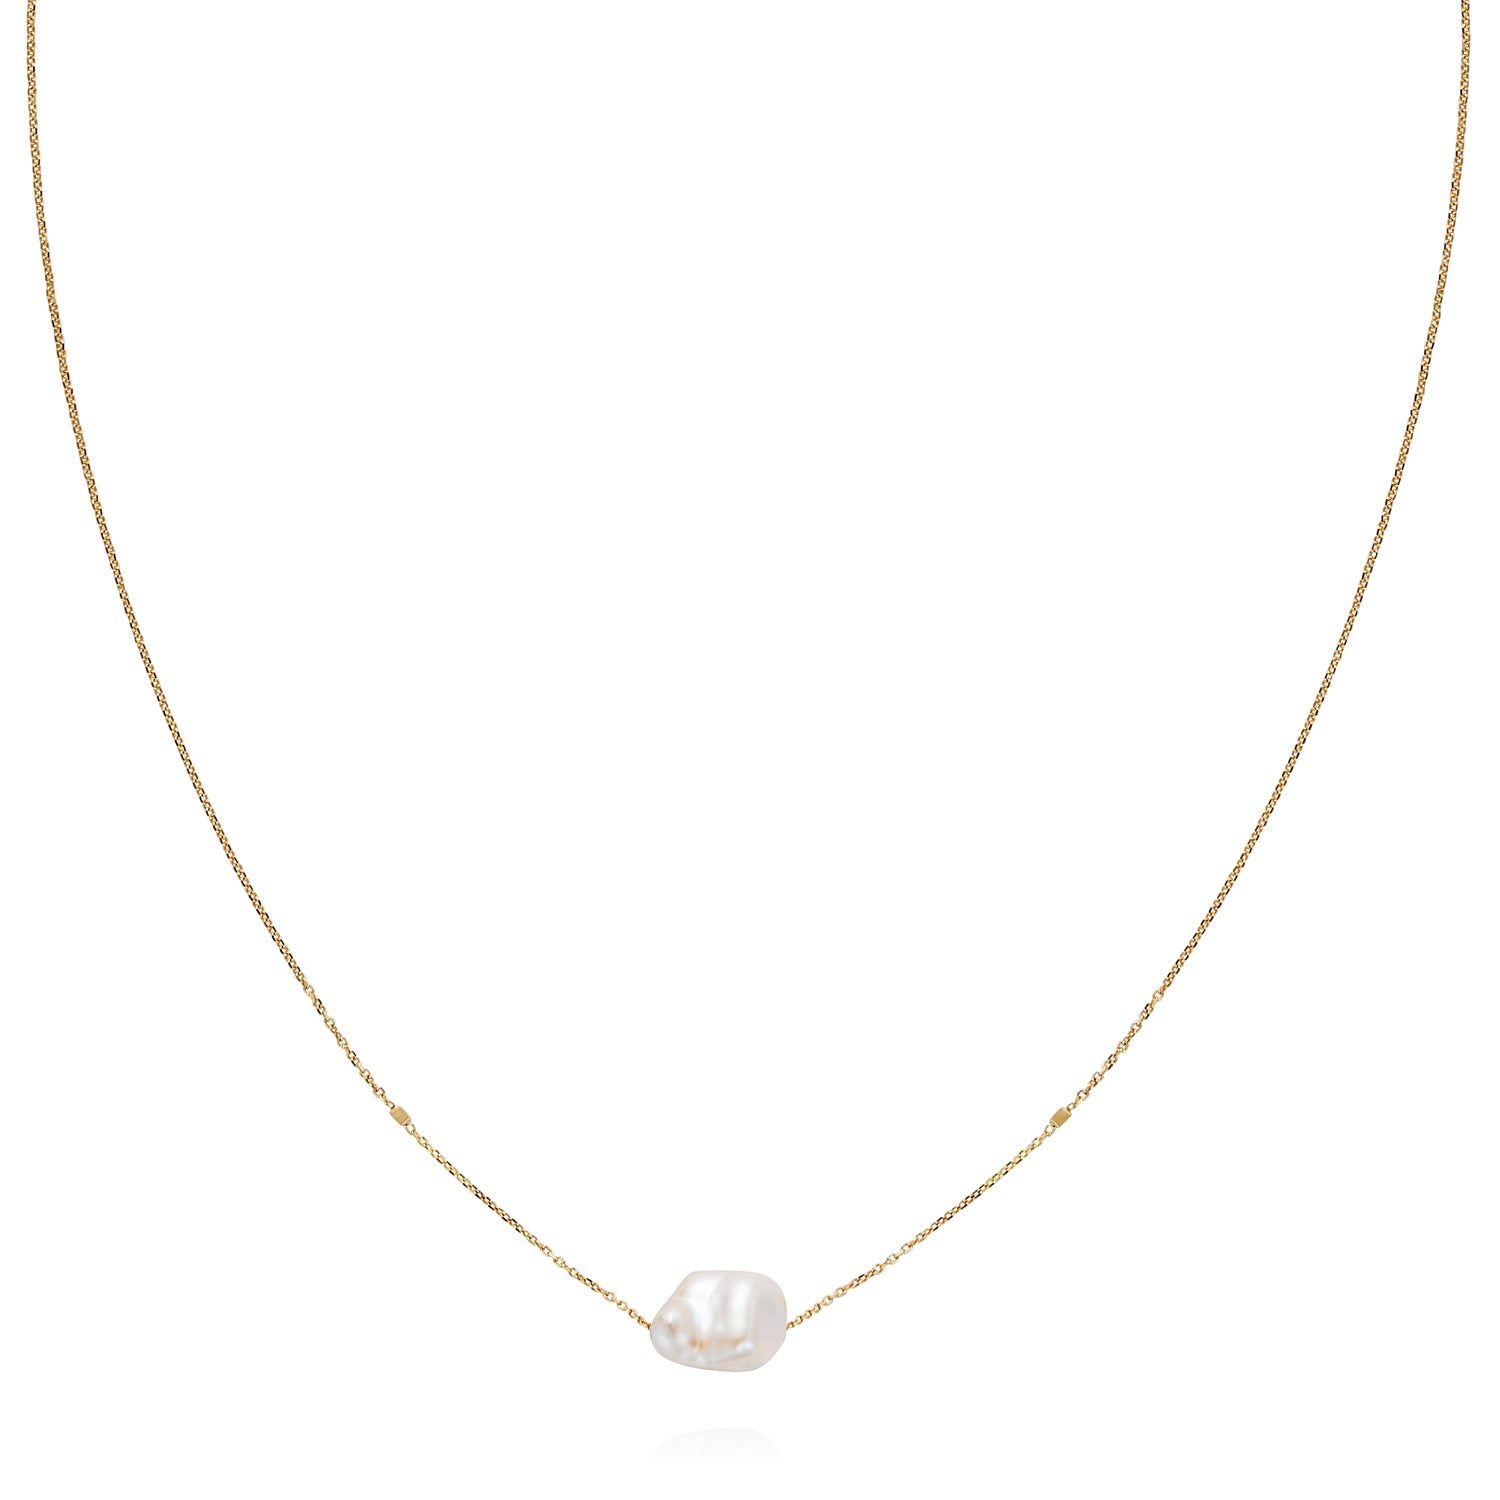 18ct yellow gold fine chain necklace with inserted bars and threaded on Keshi Pearl